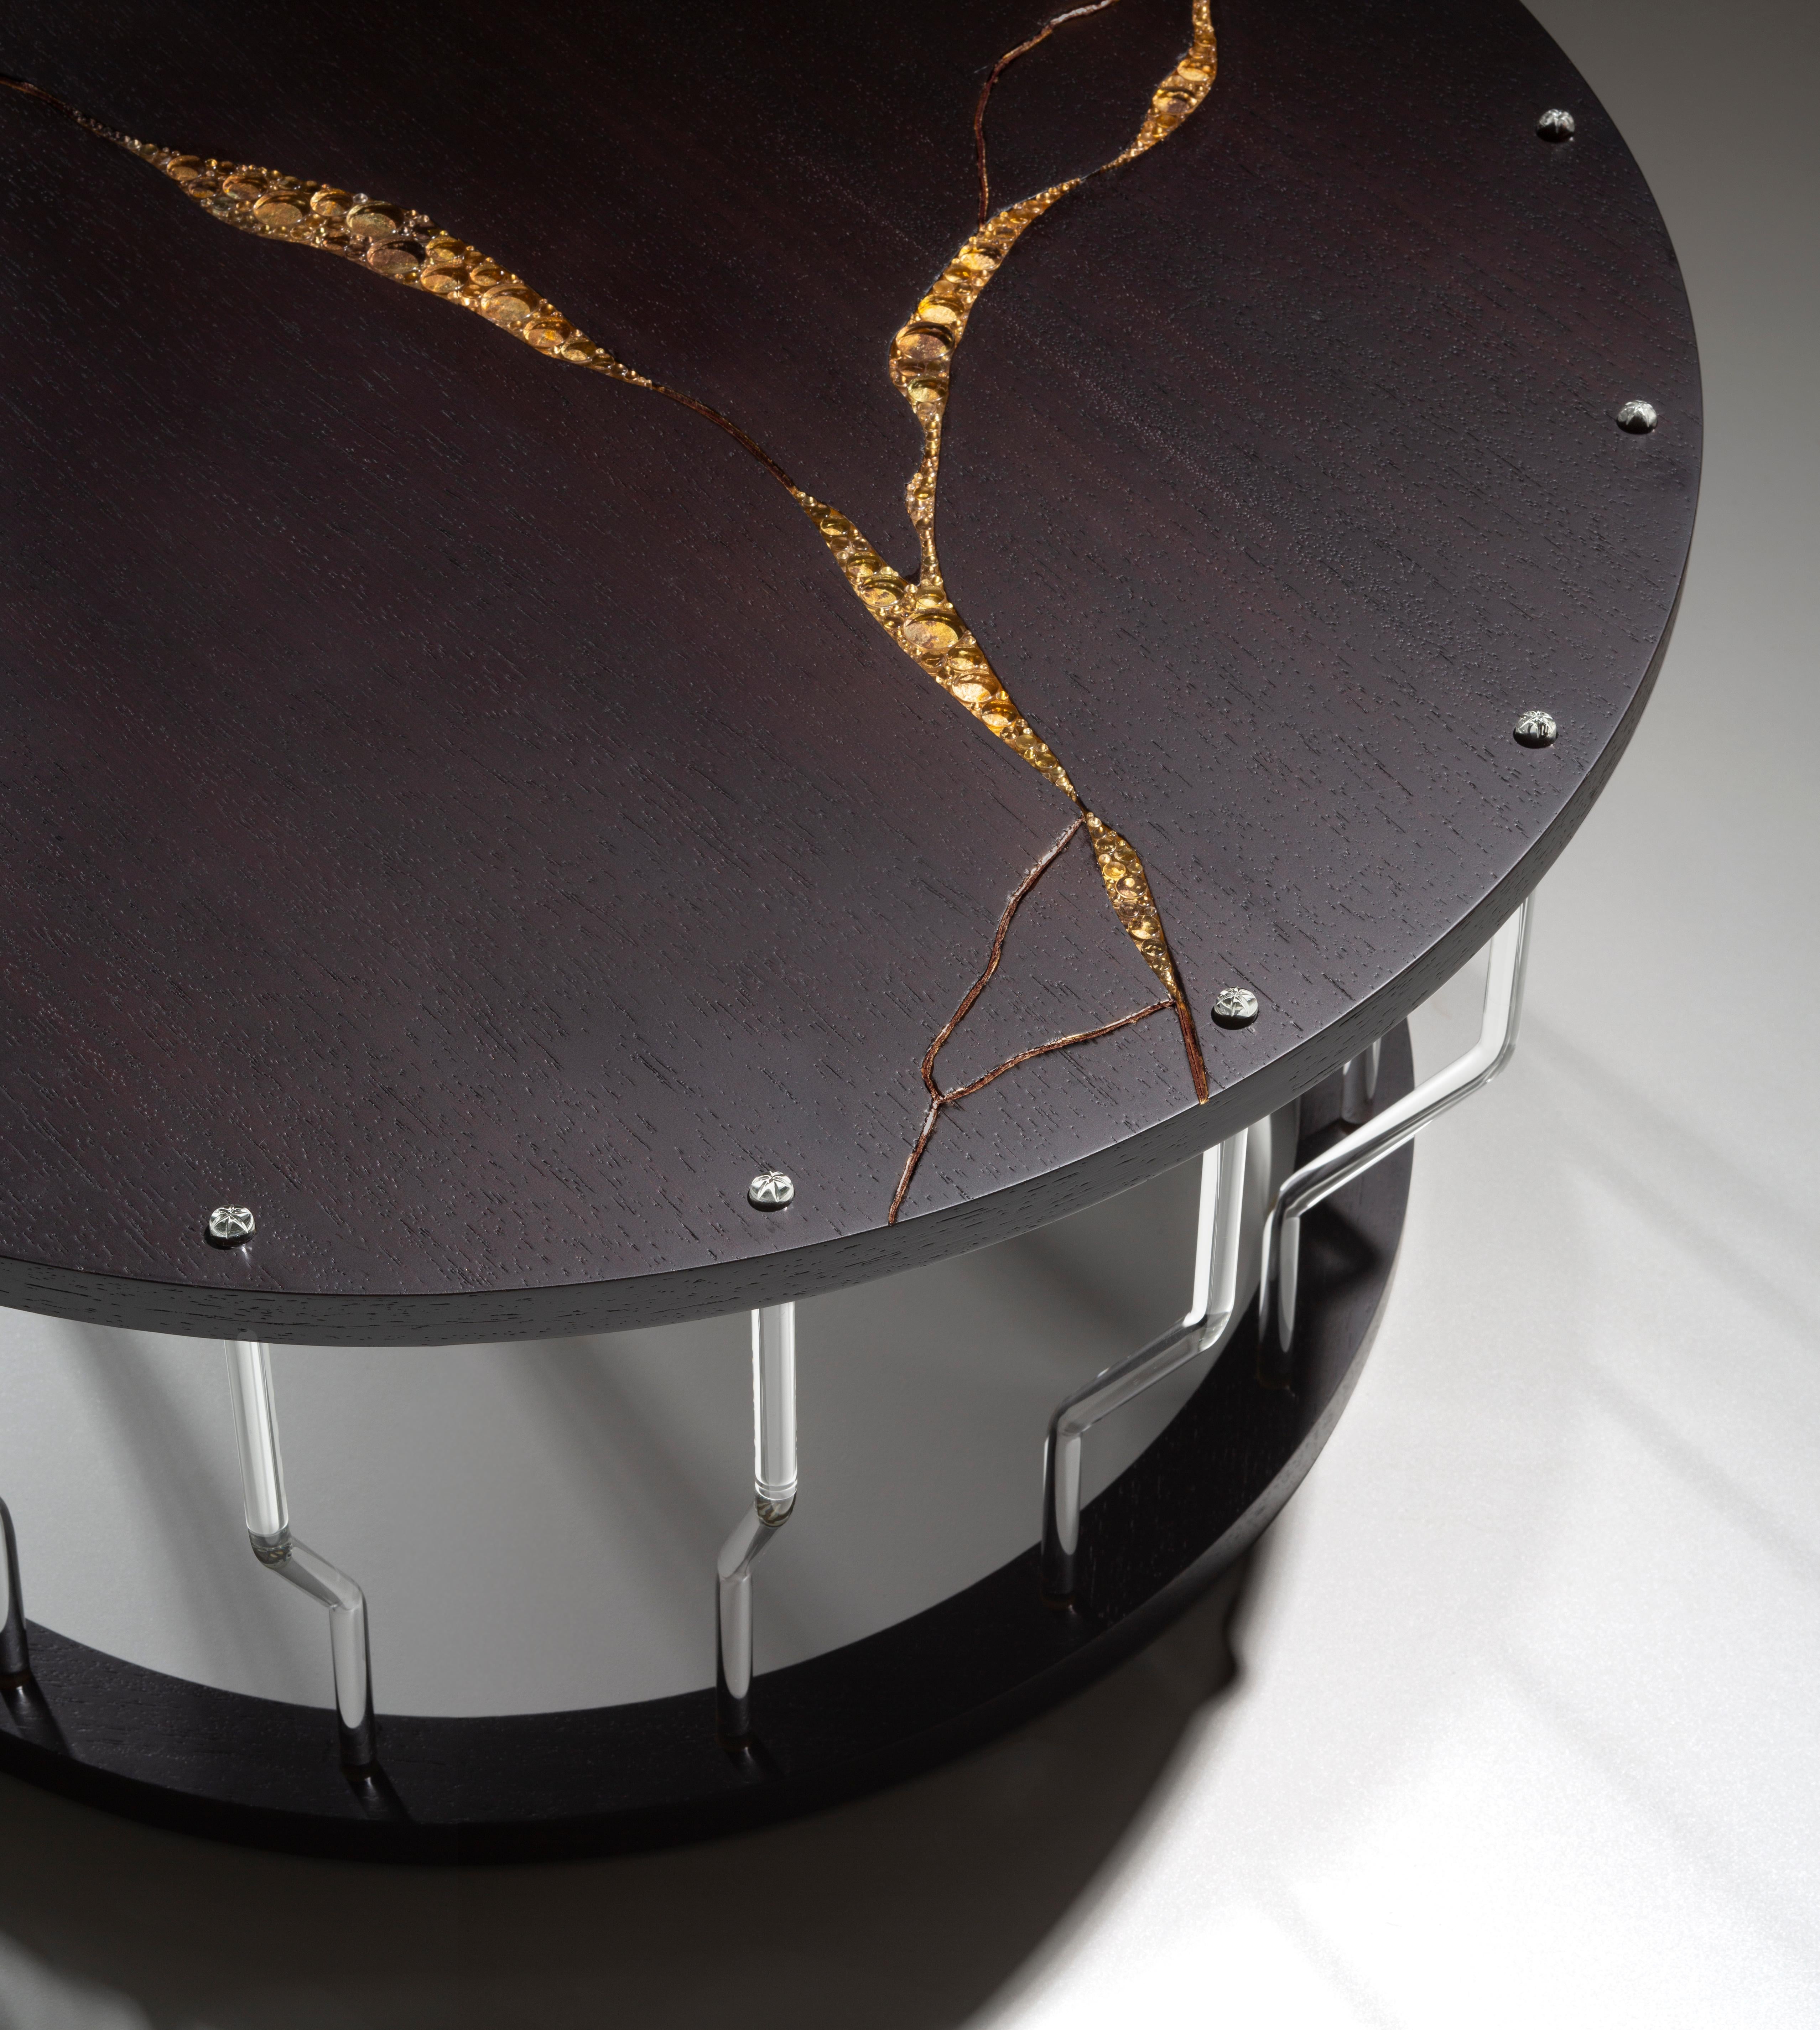 Constellation wood and glass coffee table handmade by Giordano Viganò and Simone Crestani.
In this coffee table, we used glass and oxidized gold leaf as inlay to create a decoration that reminds a constellation. The top in Wenge wood is supported